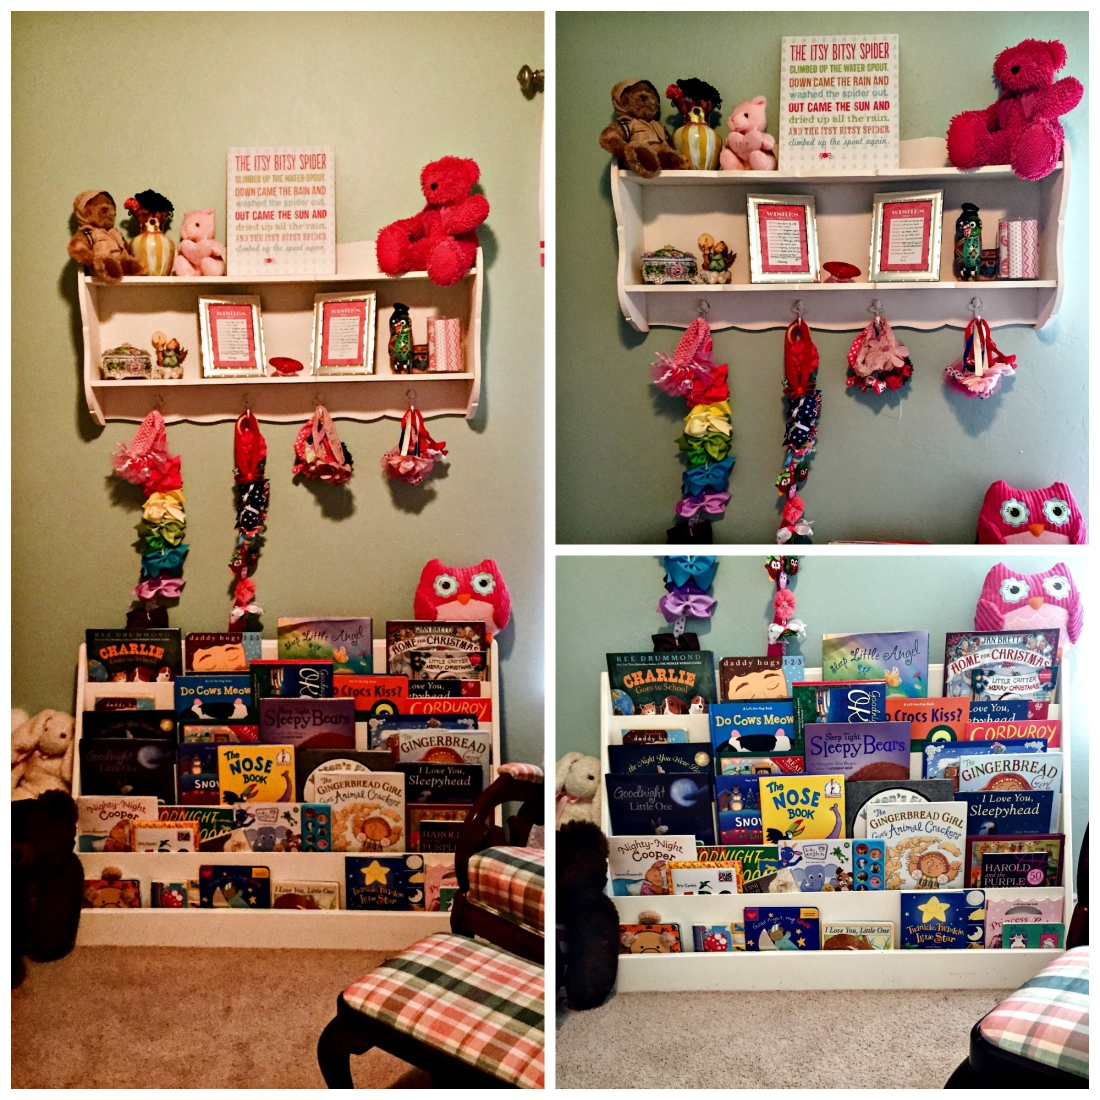 Show and Tell Tuesday: My Favorite Room - The OK MommaThe OK Momma